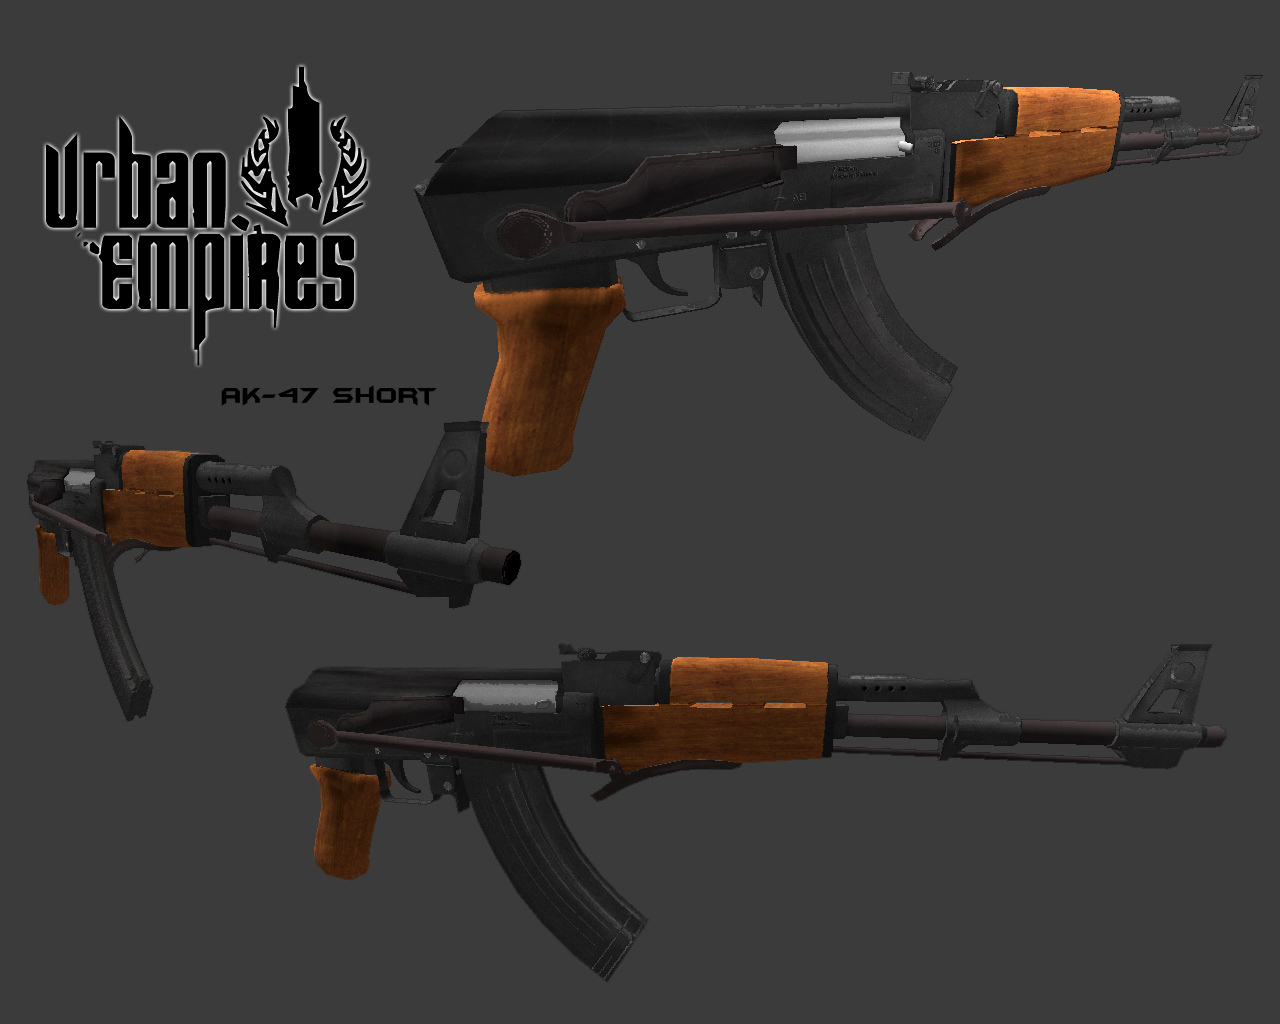 http://www.radioactive-software.com/urbanempires/August27/AK47S_Weapon.jpg